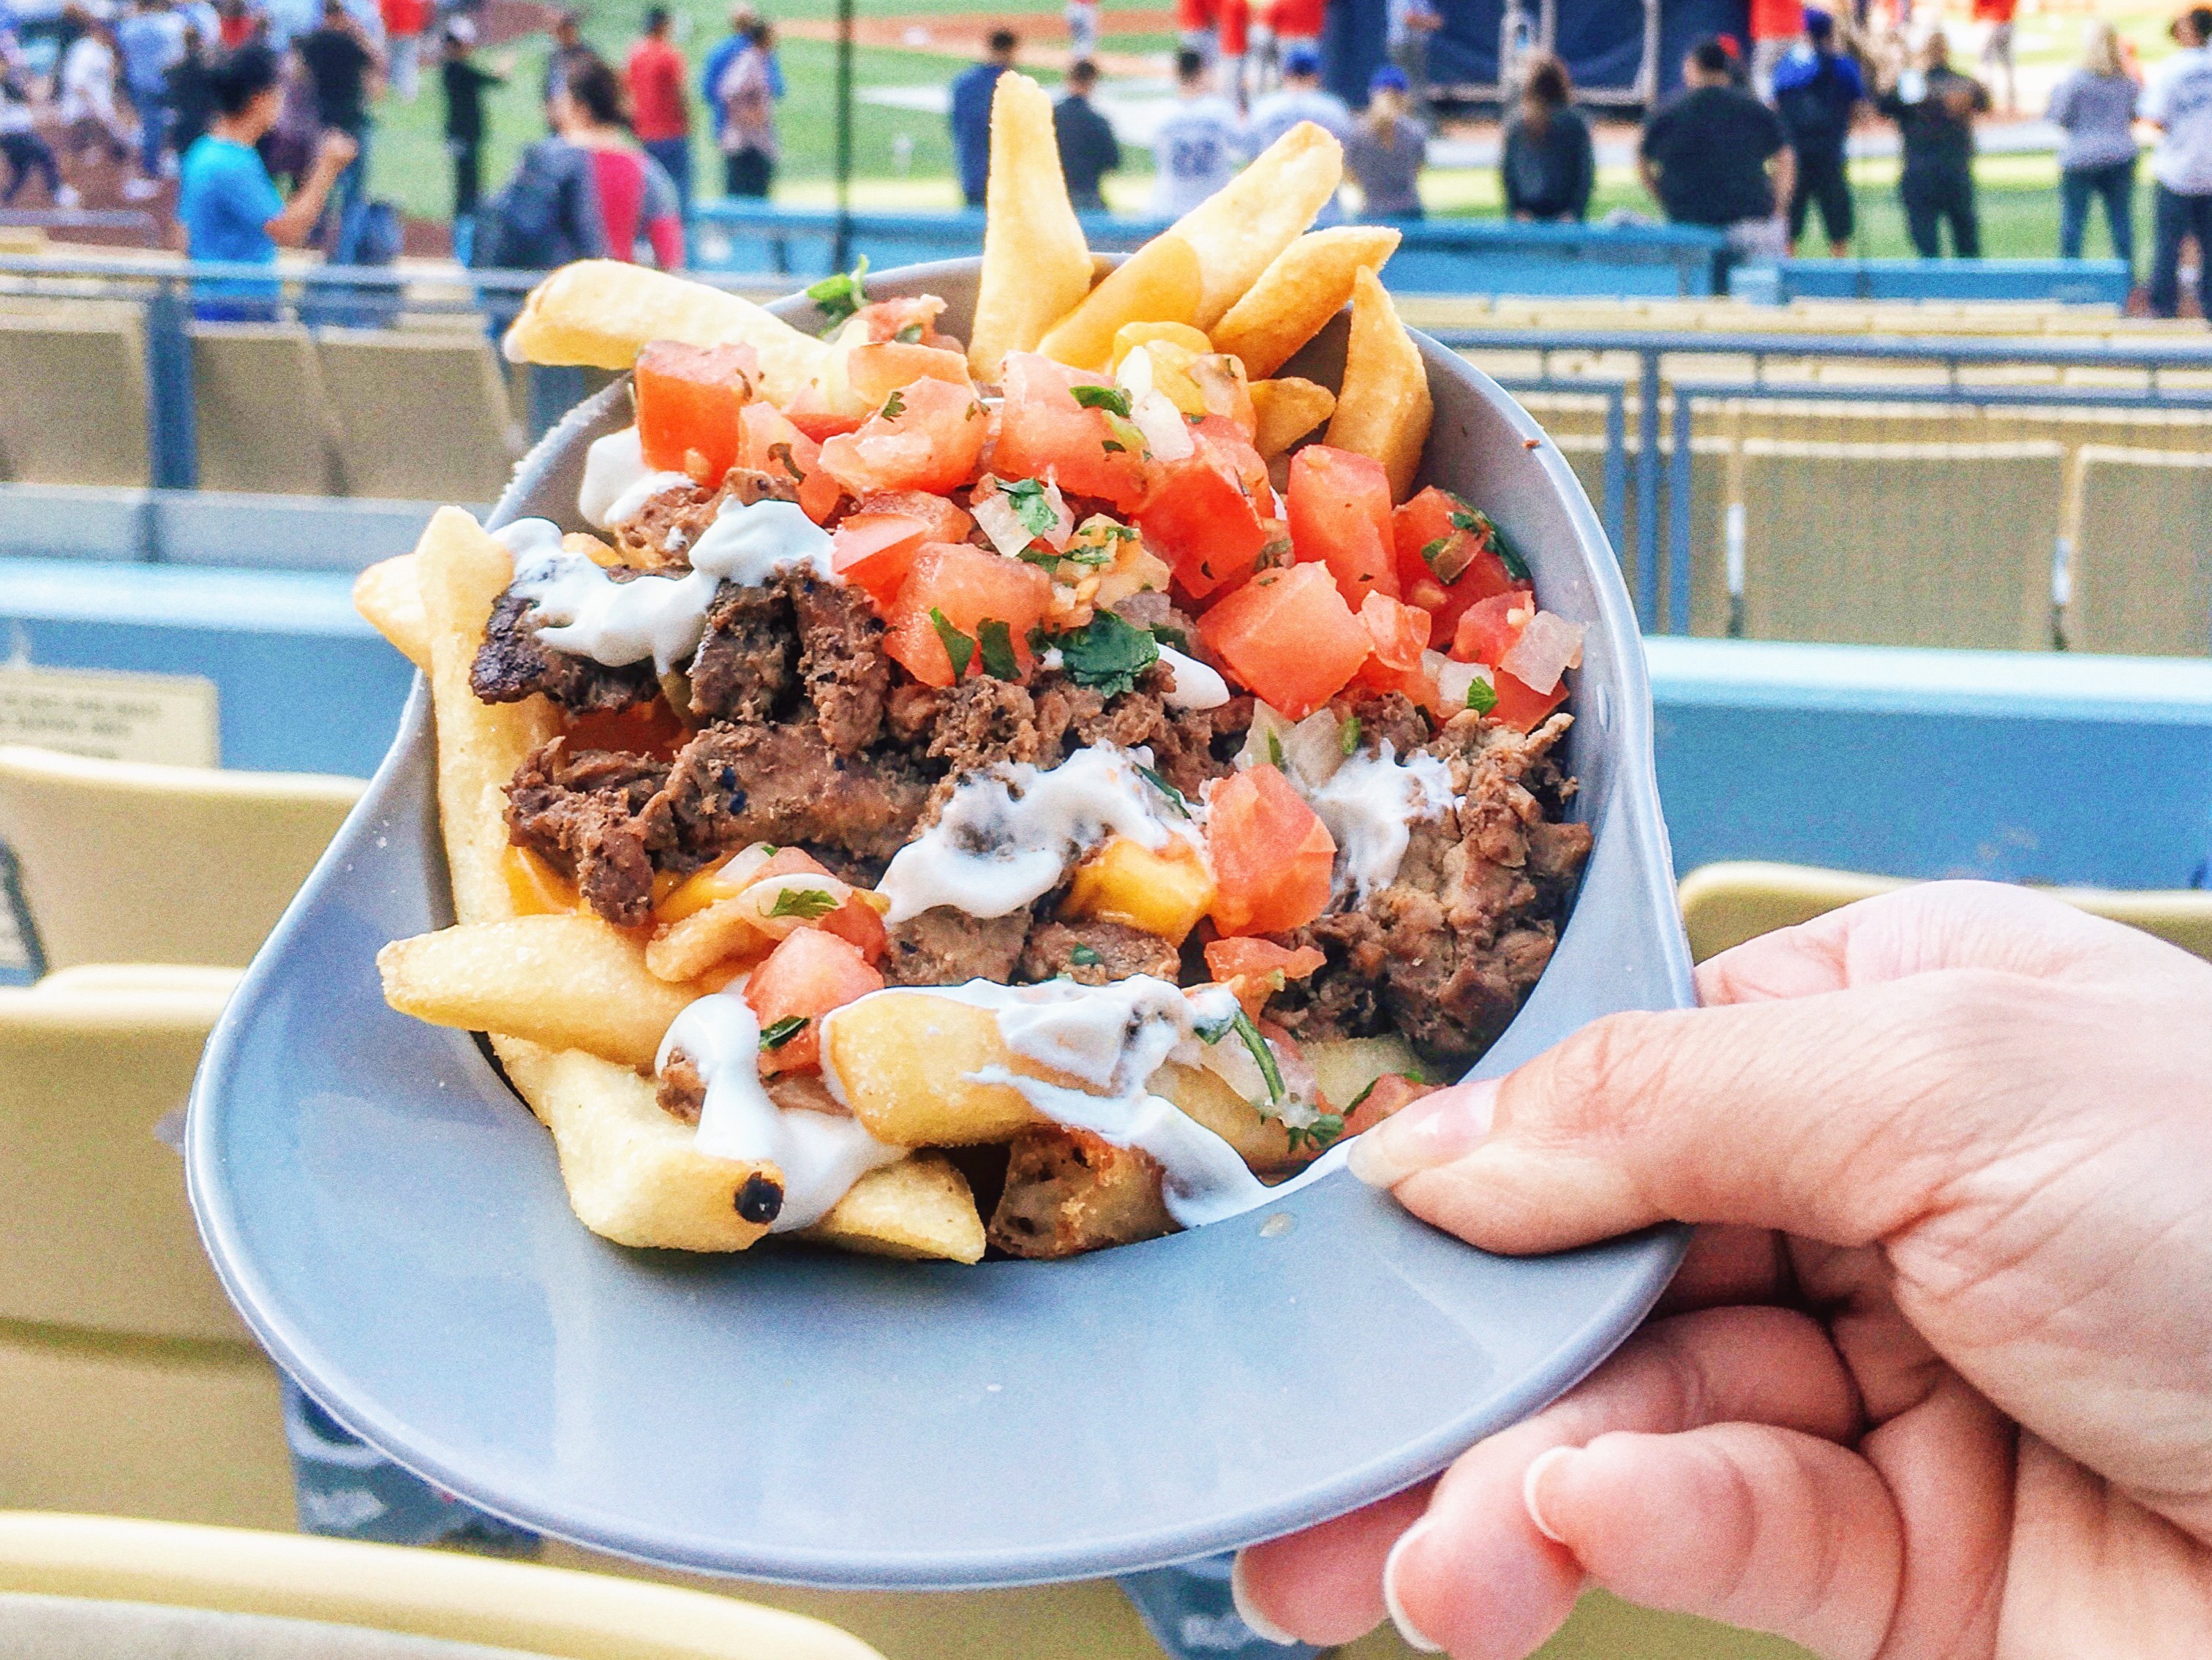 There is no shortage of french fry options at Dodger Stadium.